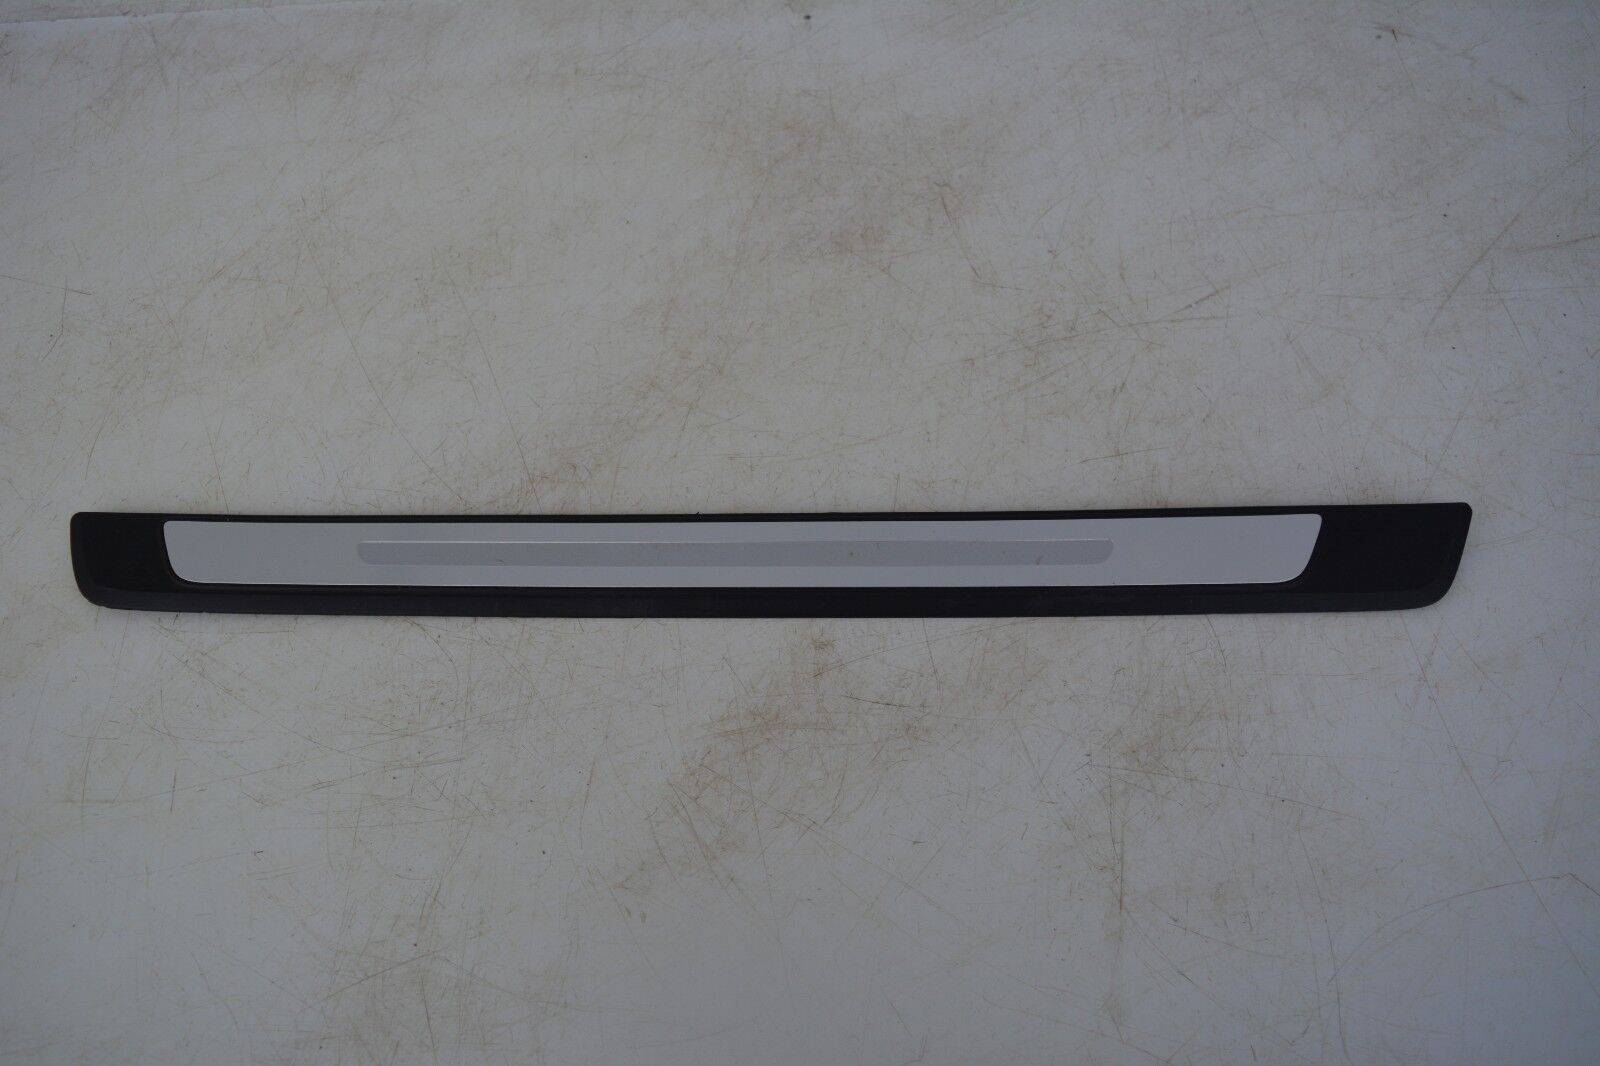 Audi A4 Door Sill Entry Trim Front Left 8W0853373F Genuine 176469540383